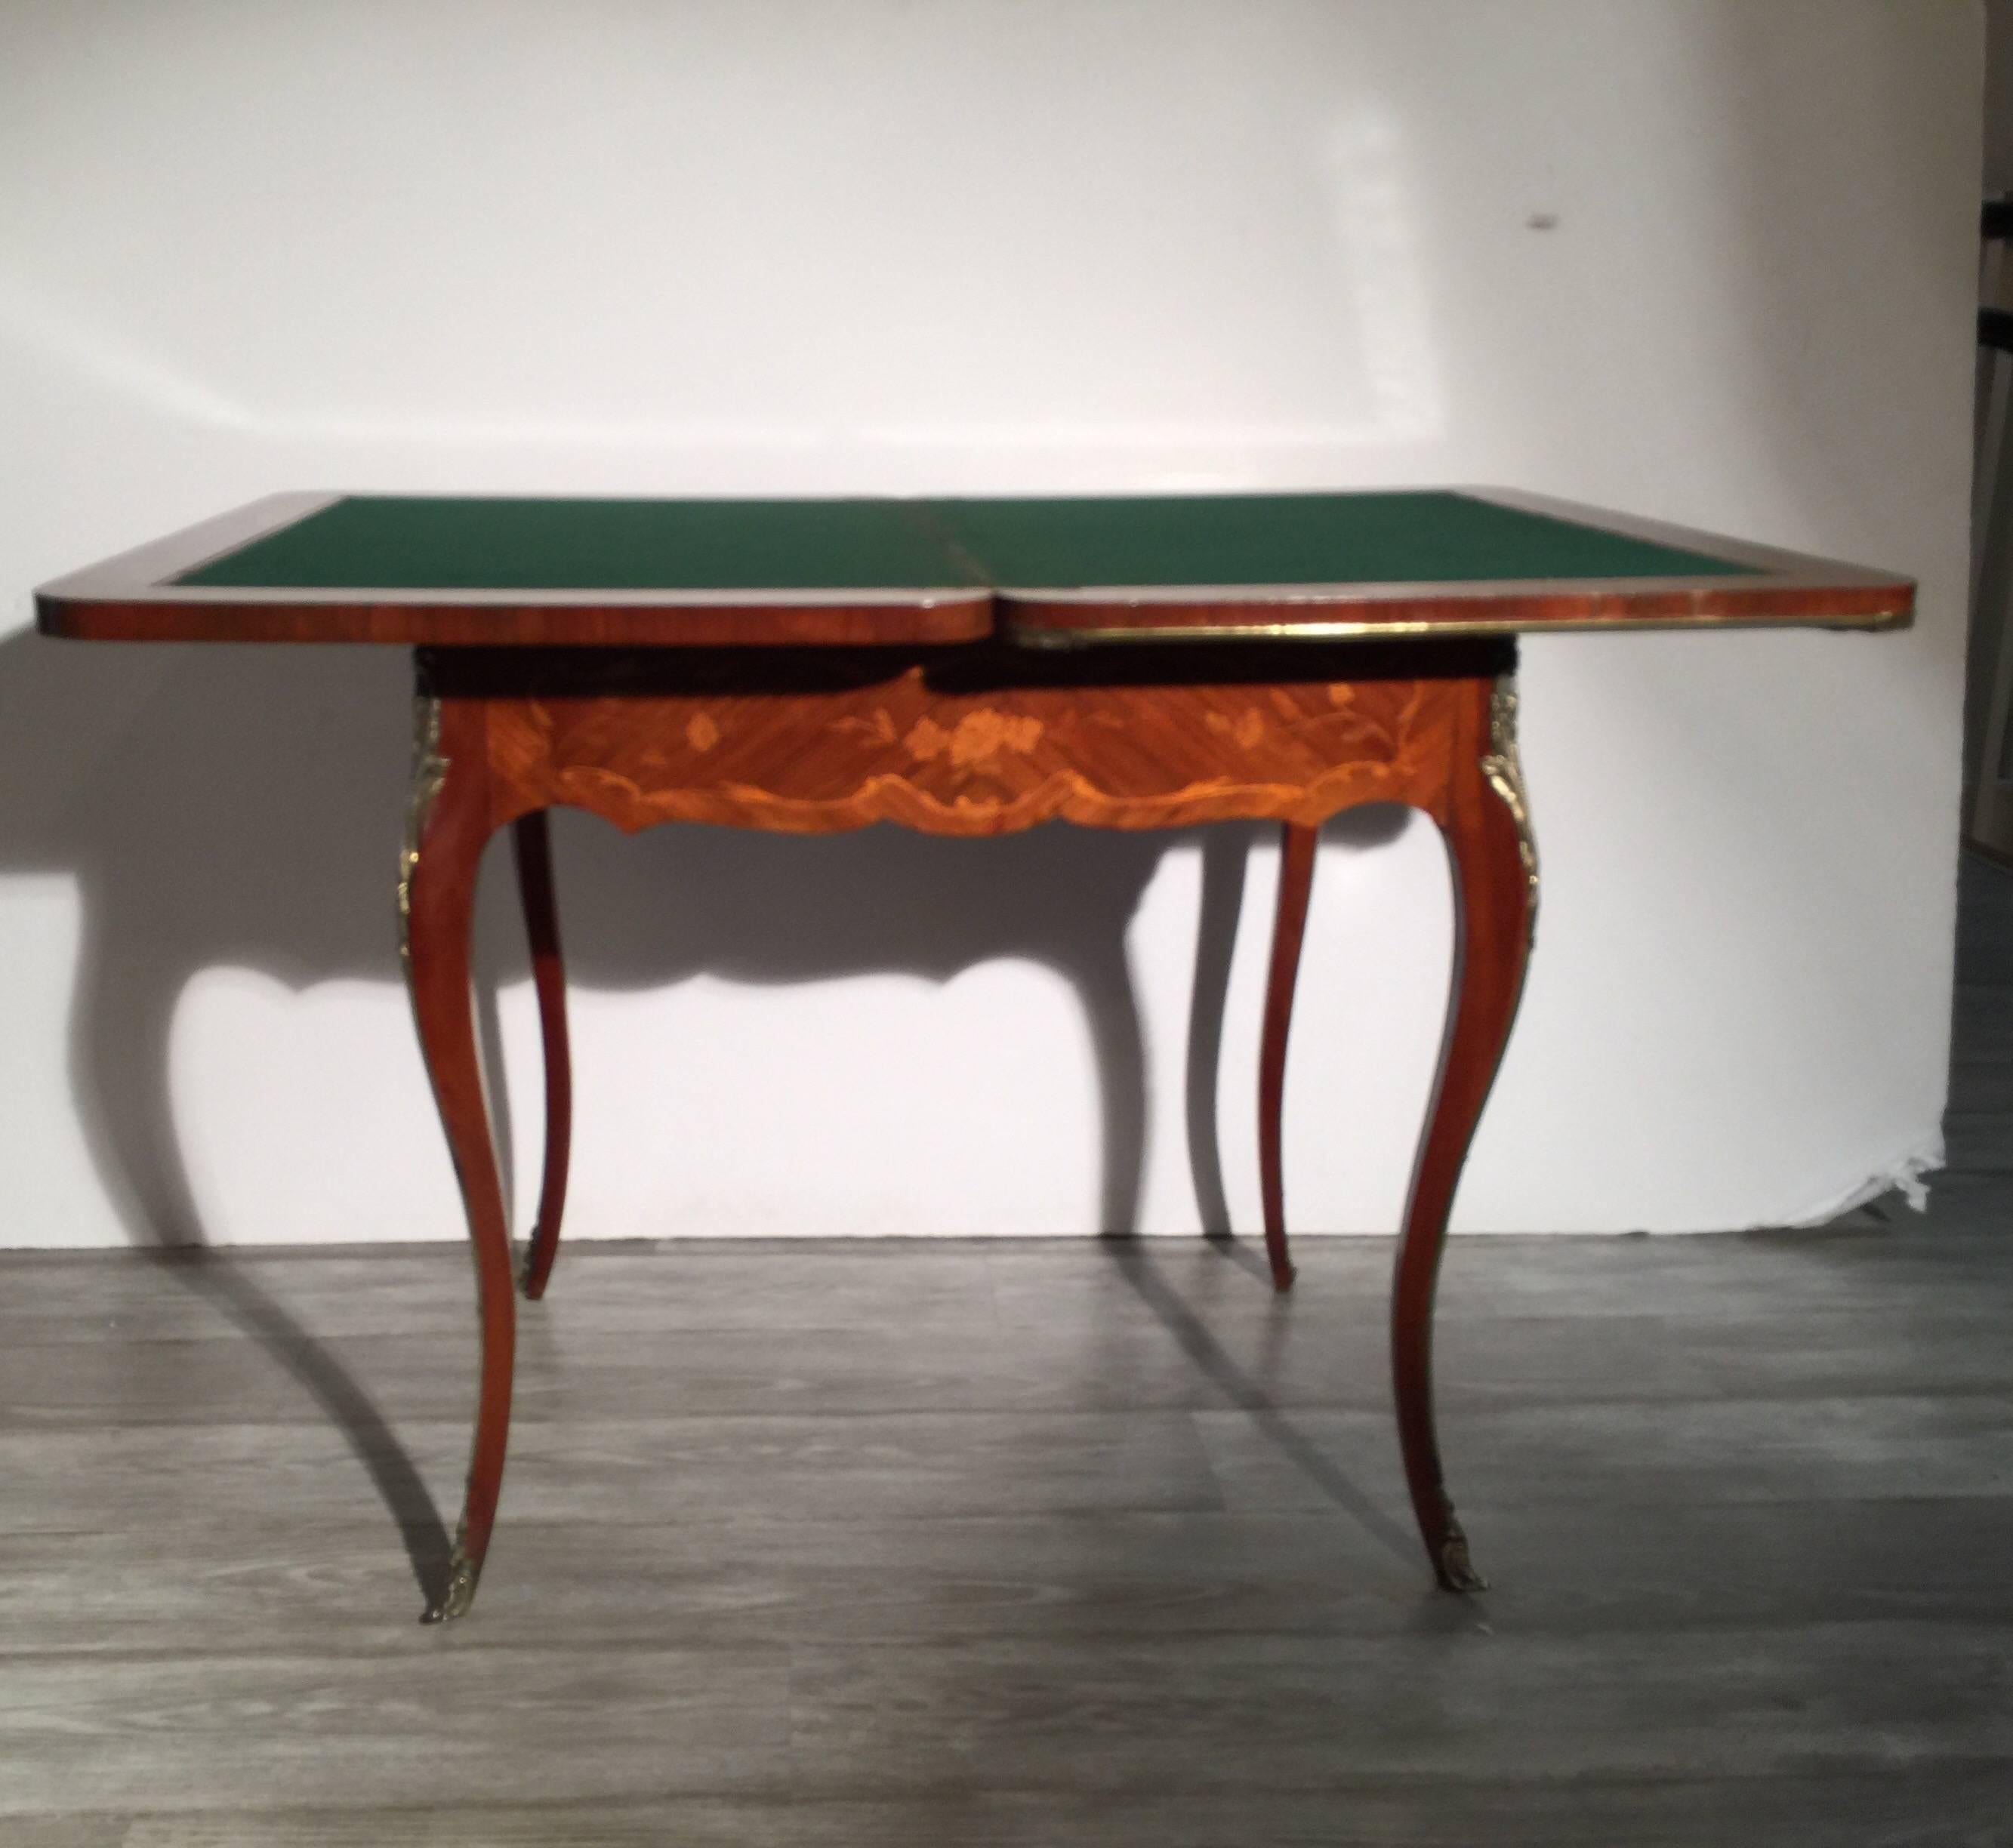 Intricately inlaid flip top game table in the Louis XV style. Kingwood, tulipwood and satinwood inlay with the edges in polished brass mounts. Recent French polish on the original finish. The top flips to double the size and is covered in green felt.